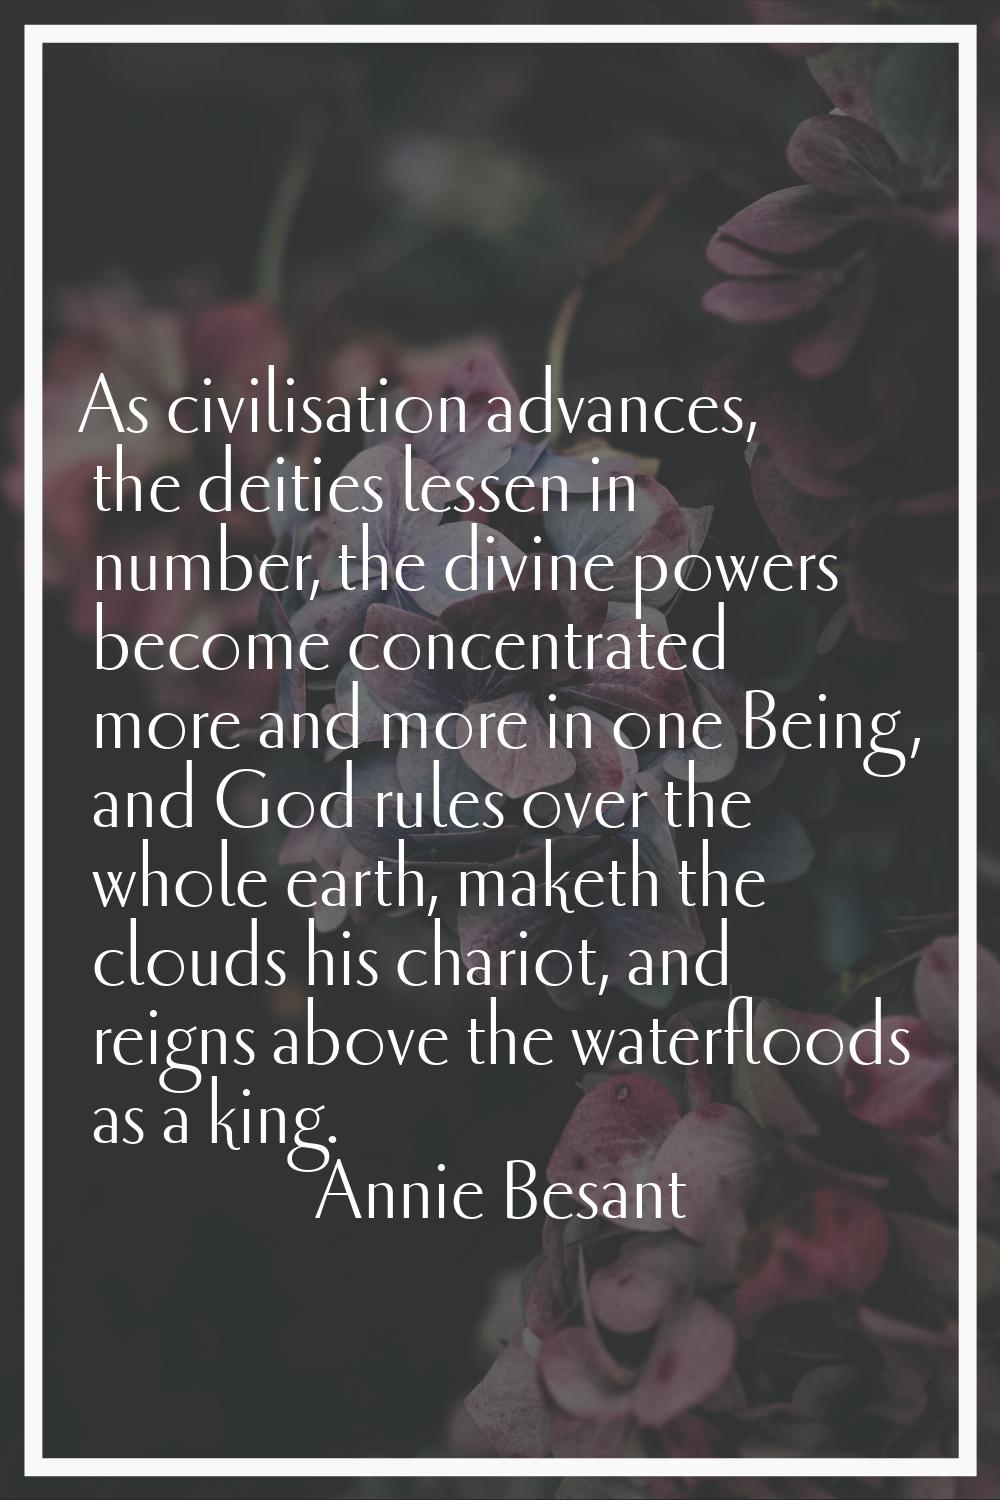 As civilisation advances, the deities lessen in number, the divine powers become concentrated more 